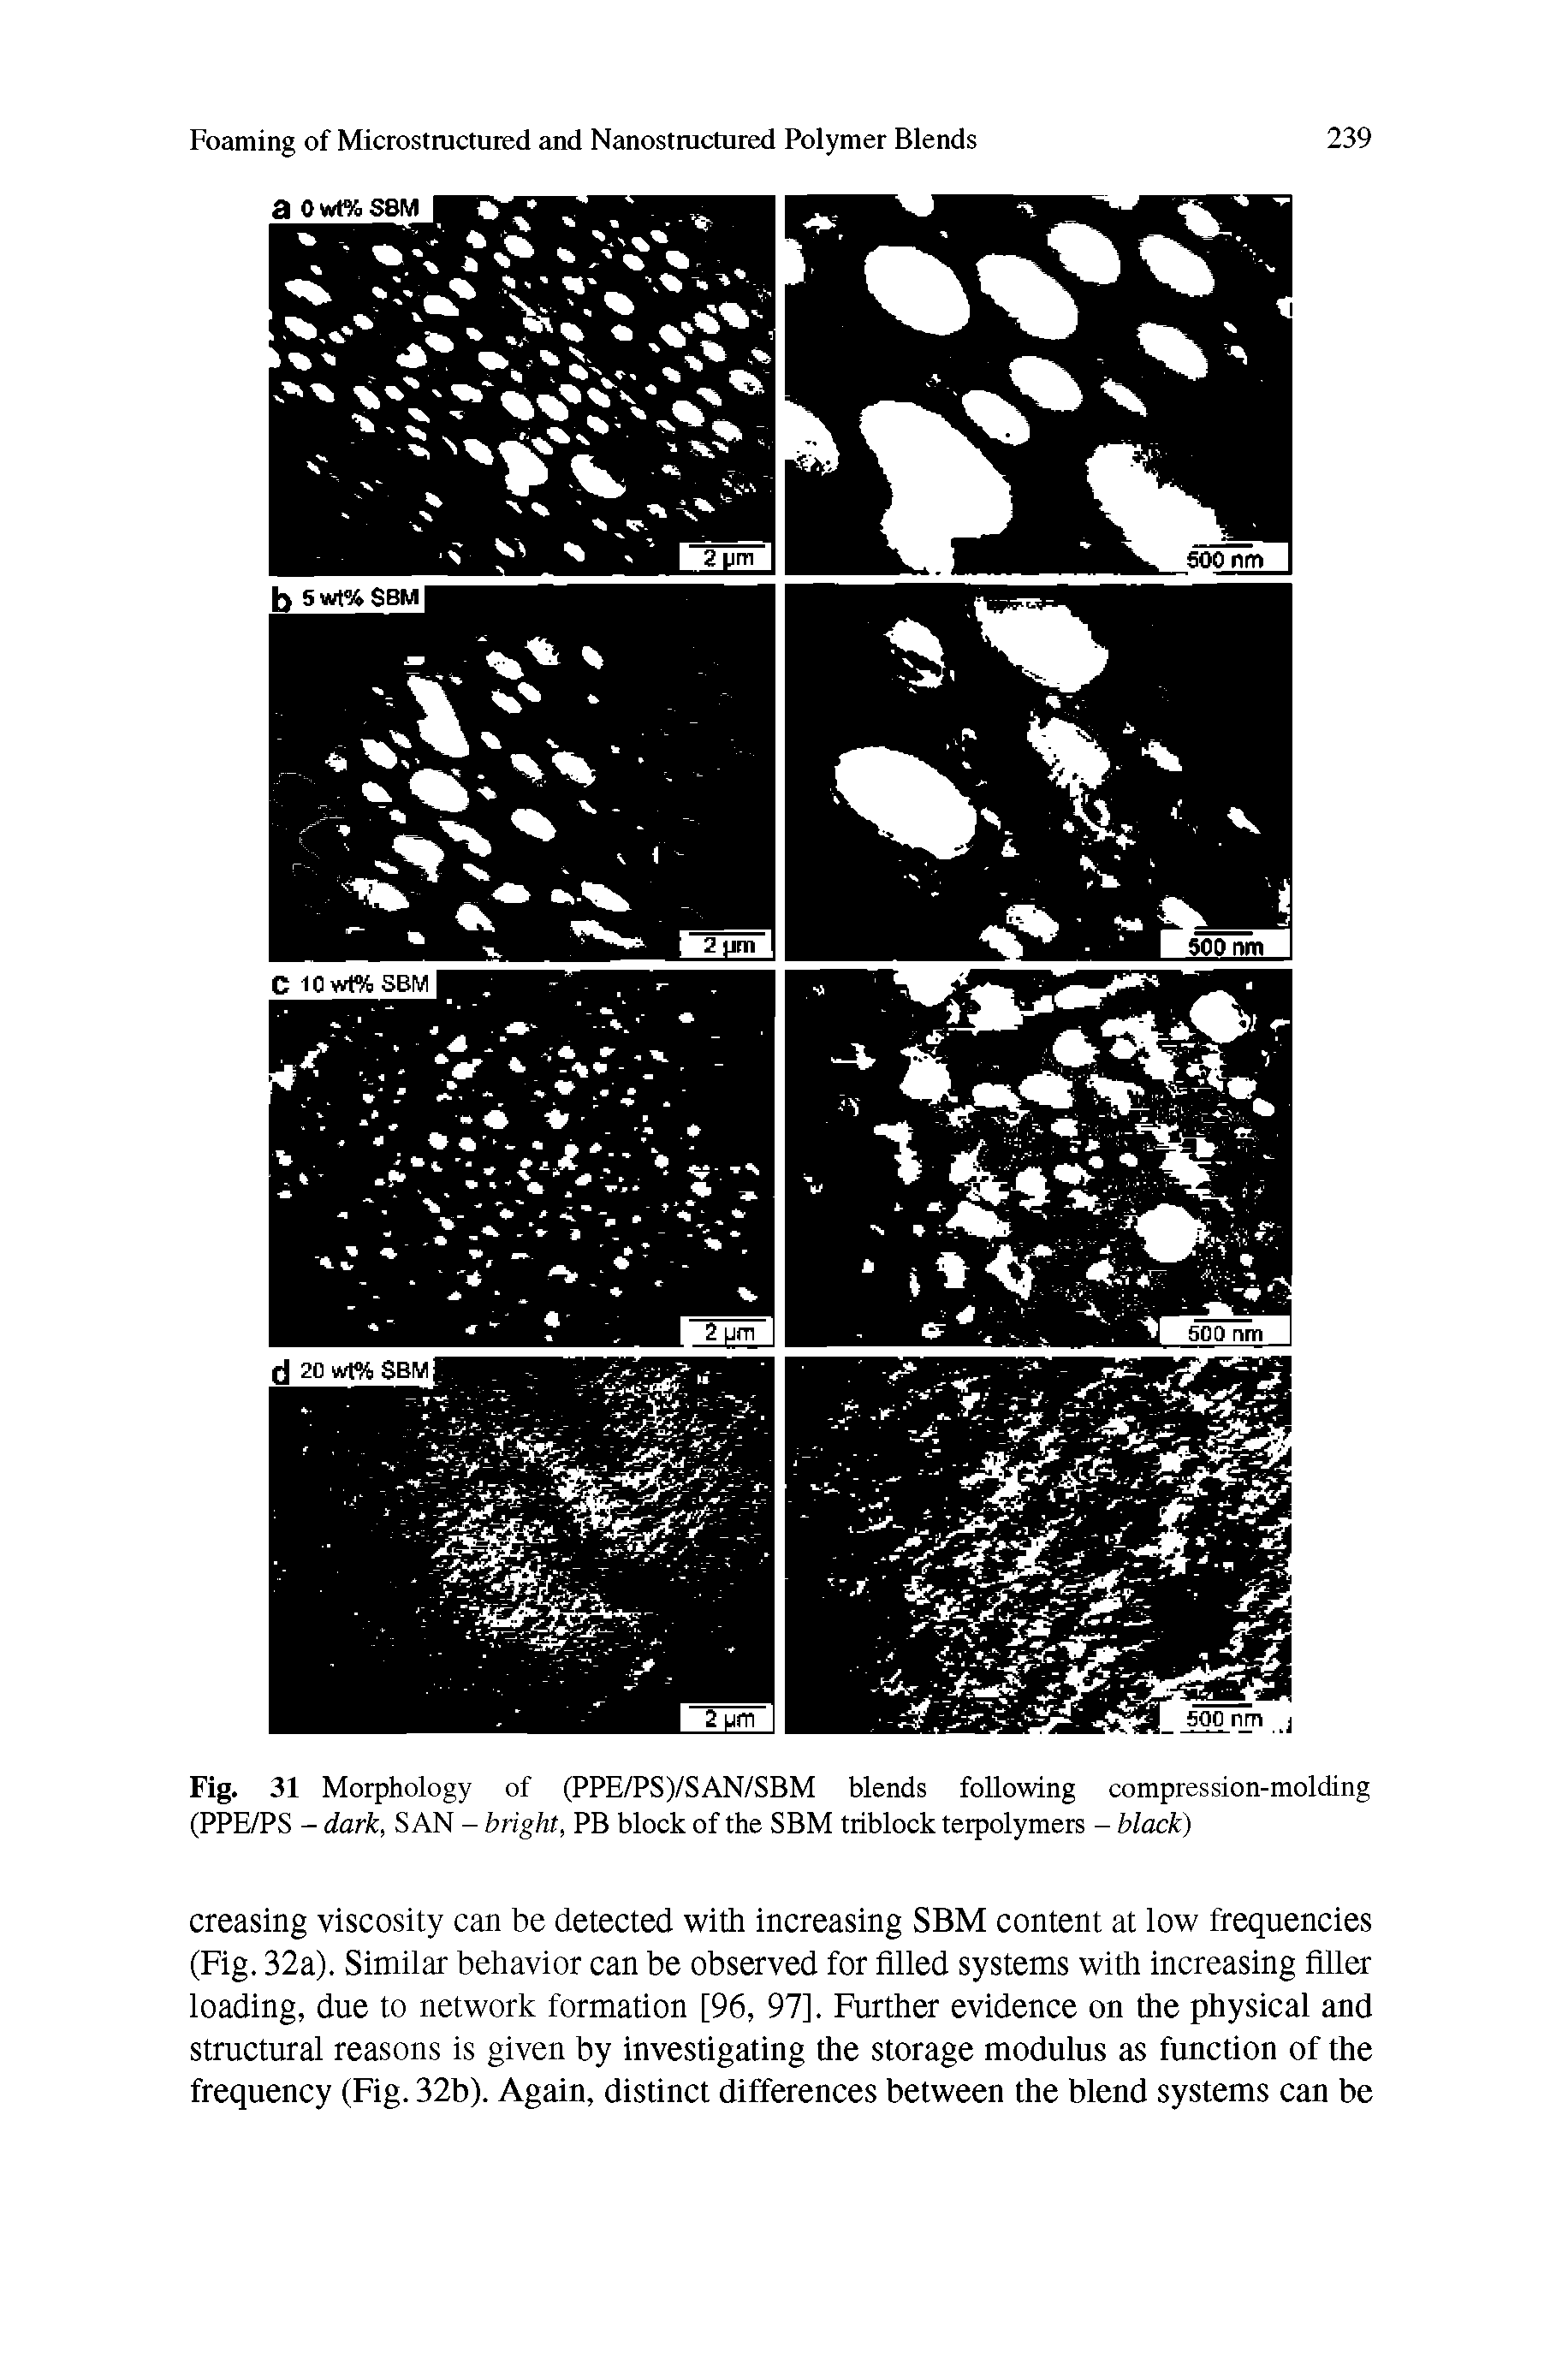 Fig. 31 Morphology of (PPE/PS)/SAN/SBM blends following compression-molding (PPE/PS - dark, SAN - bright, PB block of the SBM triblock terpolymers - black)...